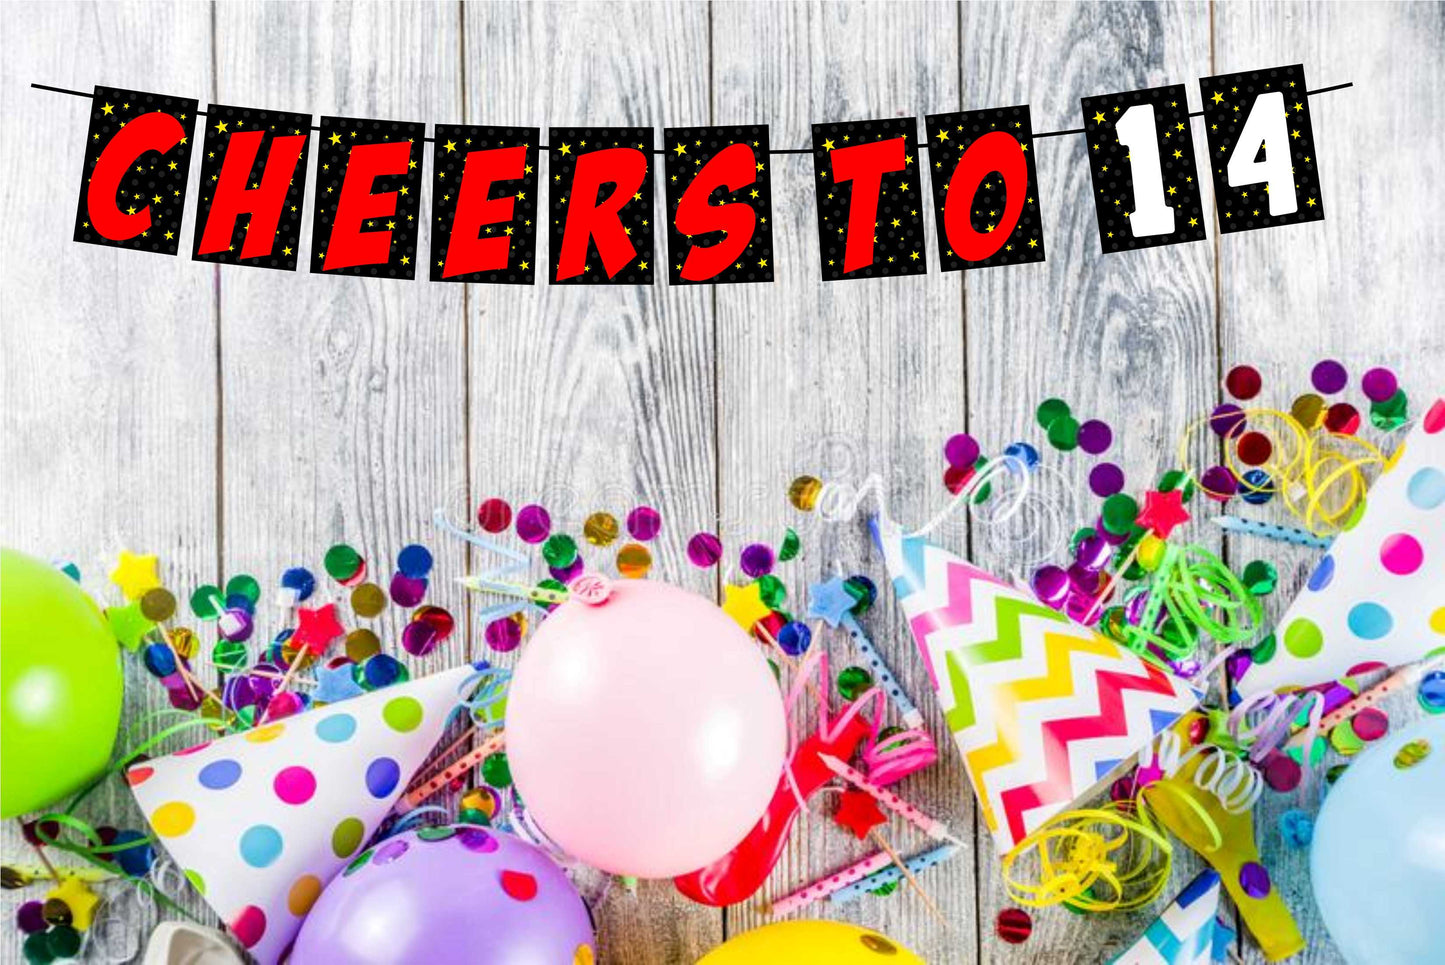 Cheers to 14 Birthday Banner for Photo Shoot Backdrop and Theme Party